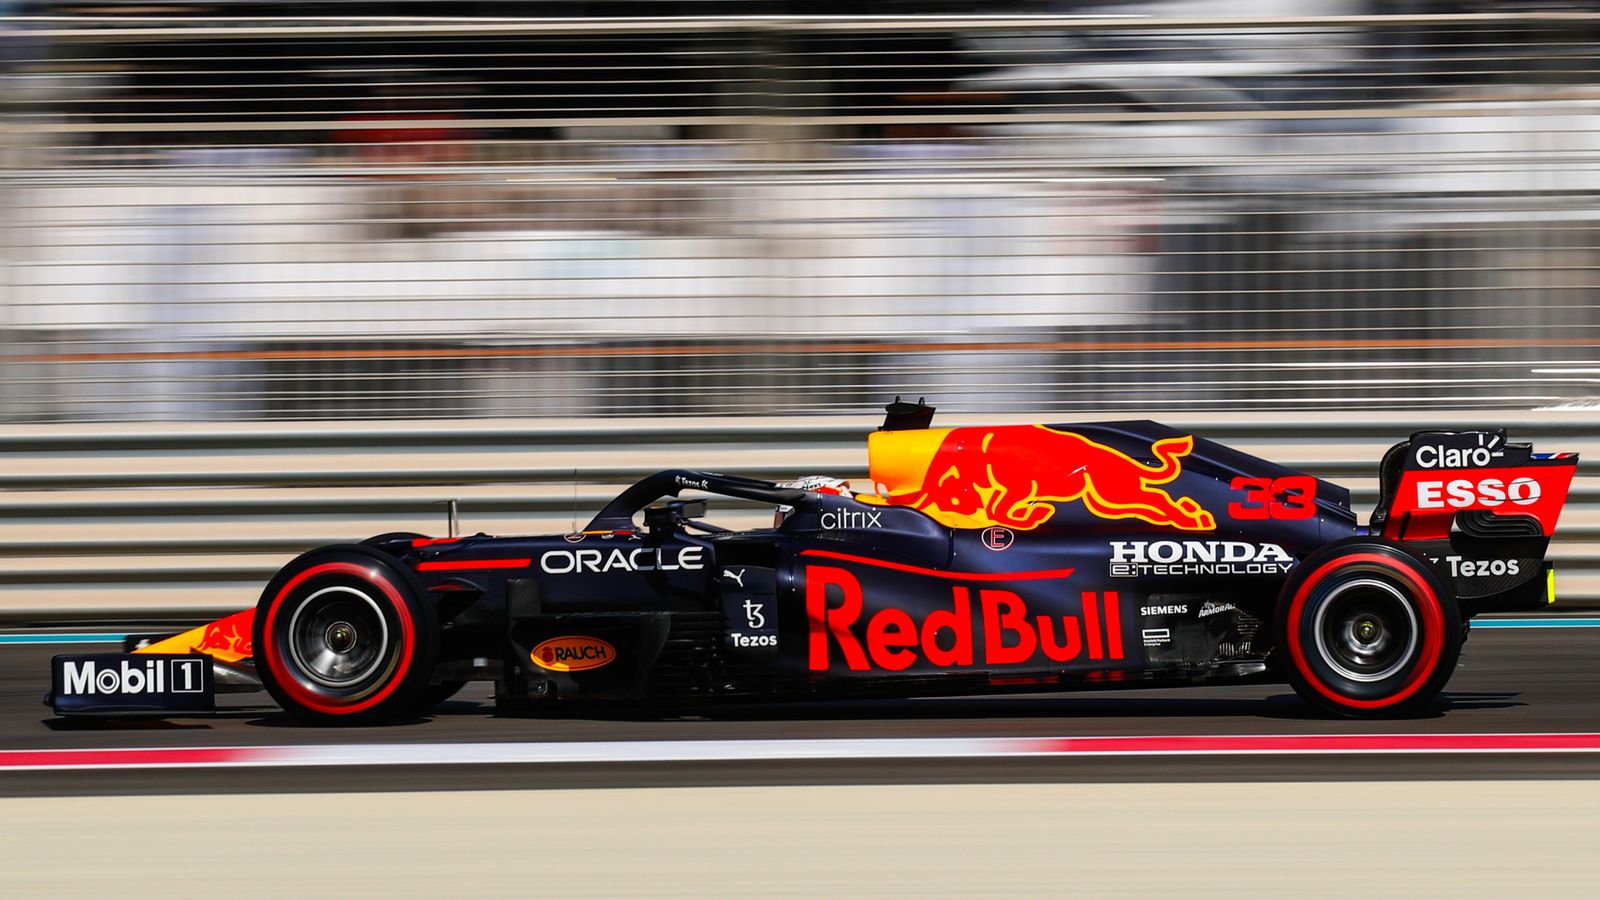 Abu Dhabi GP: Max Verstappen quickest in Practice One with Lewis Hamilton third as F1 title decider begins